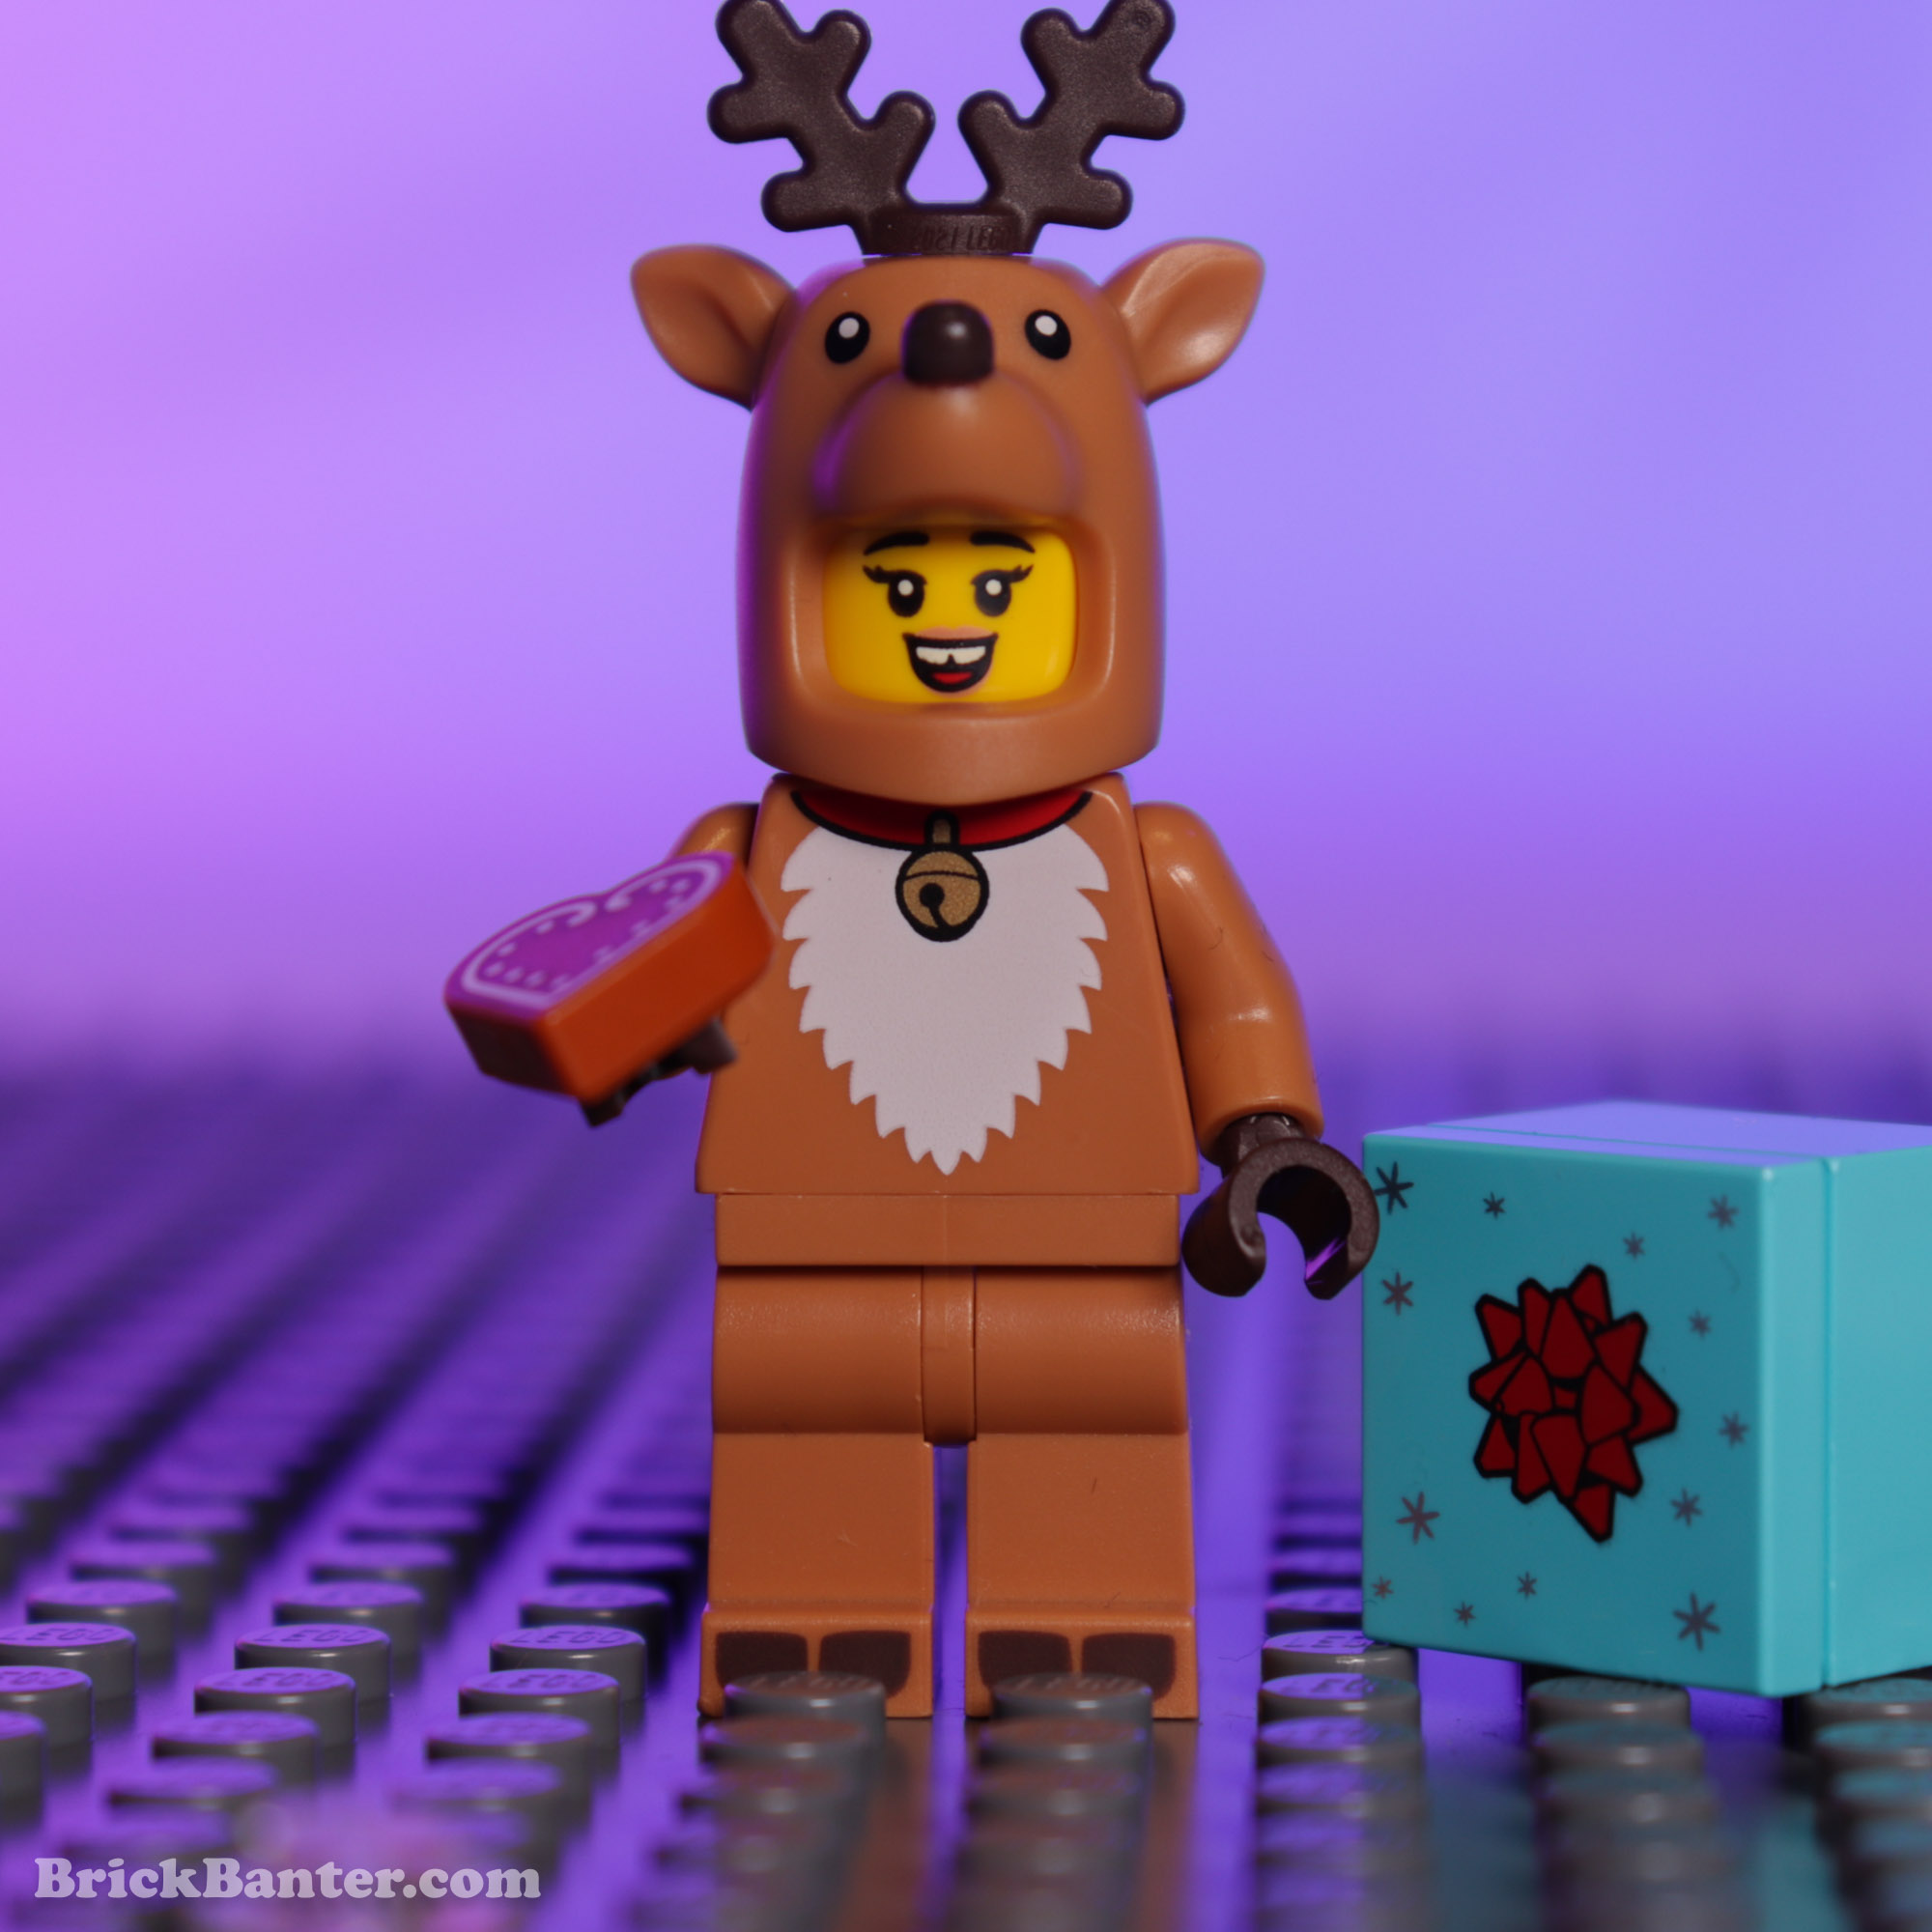 LEGO 71036 - Series 23 CMF     - Brick Banter New Release Set Review